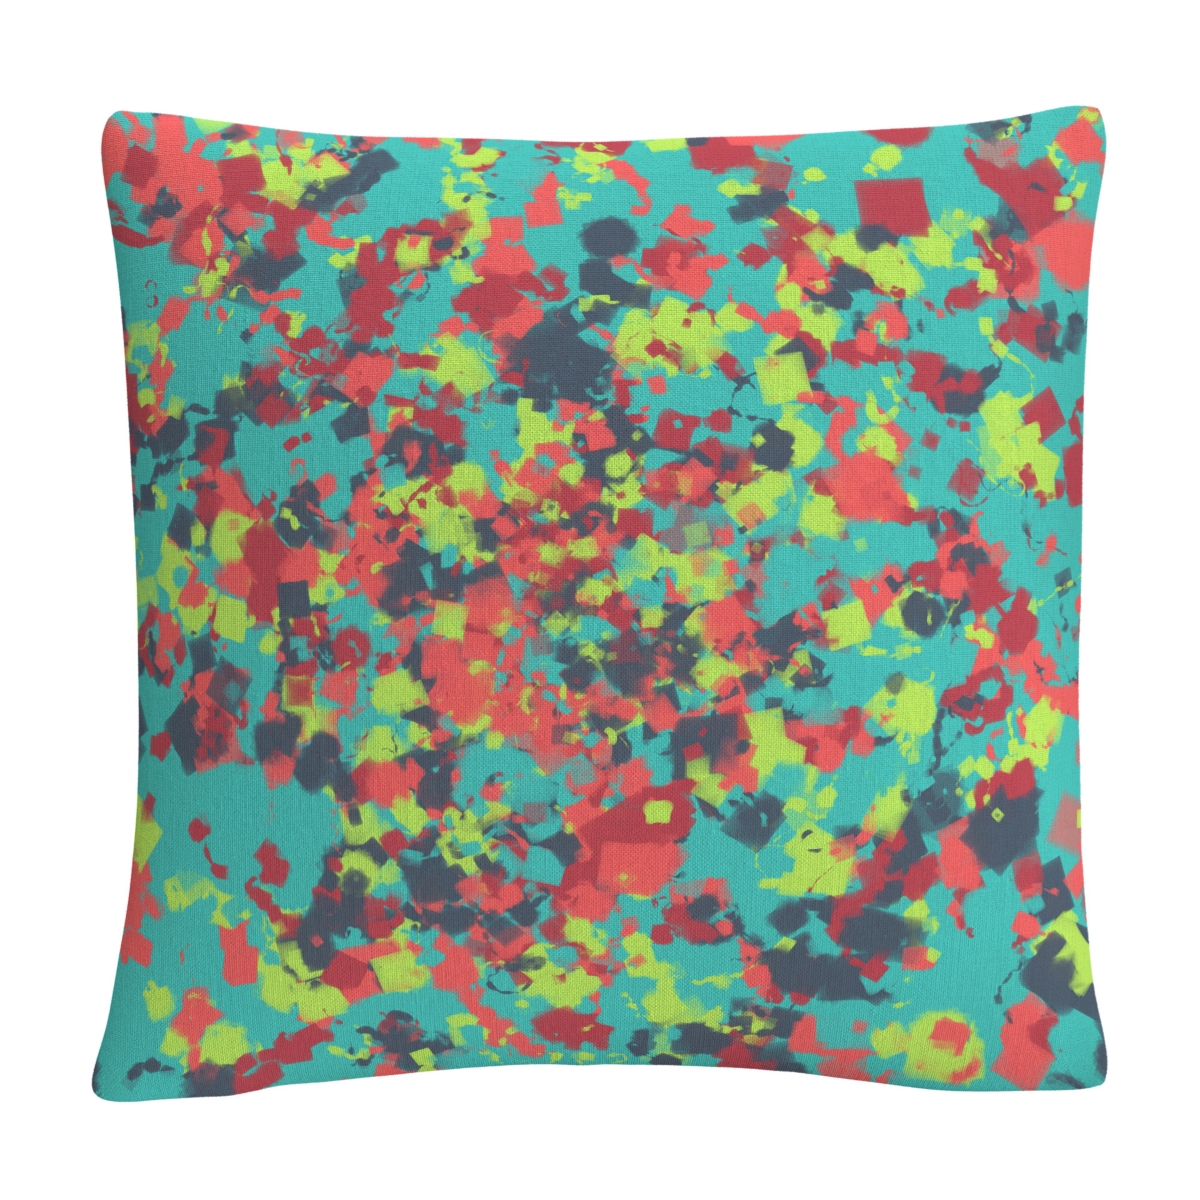 Abc Speckled Colorful Splatter Abstract 9Decorative Pillow, 16 x 16